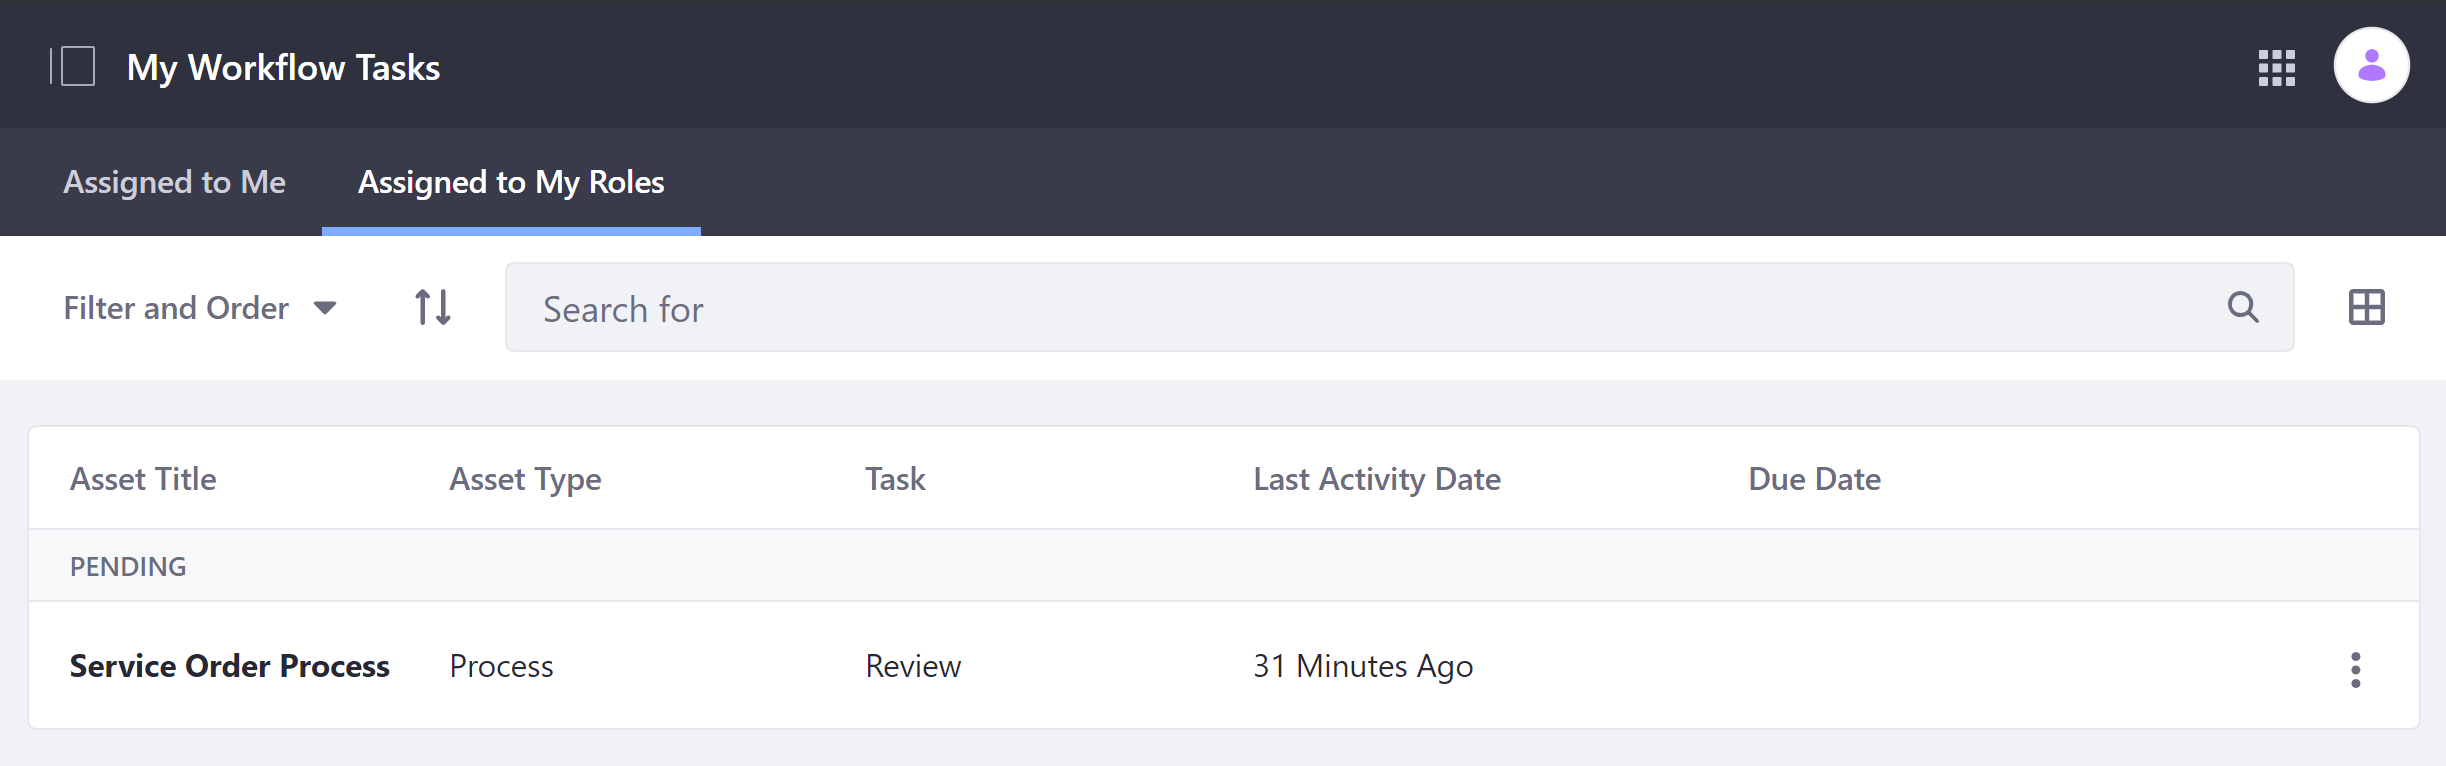 View Kaleo process tasks assigned to you or your role under My Workflow Tasks in the Personal Menu.